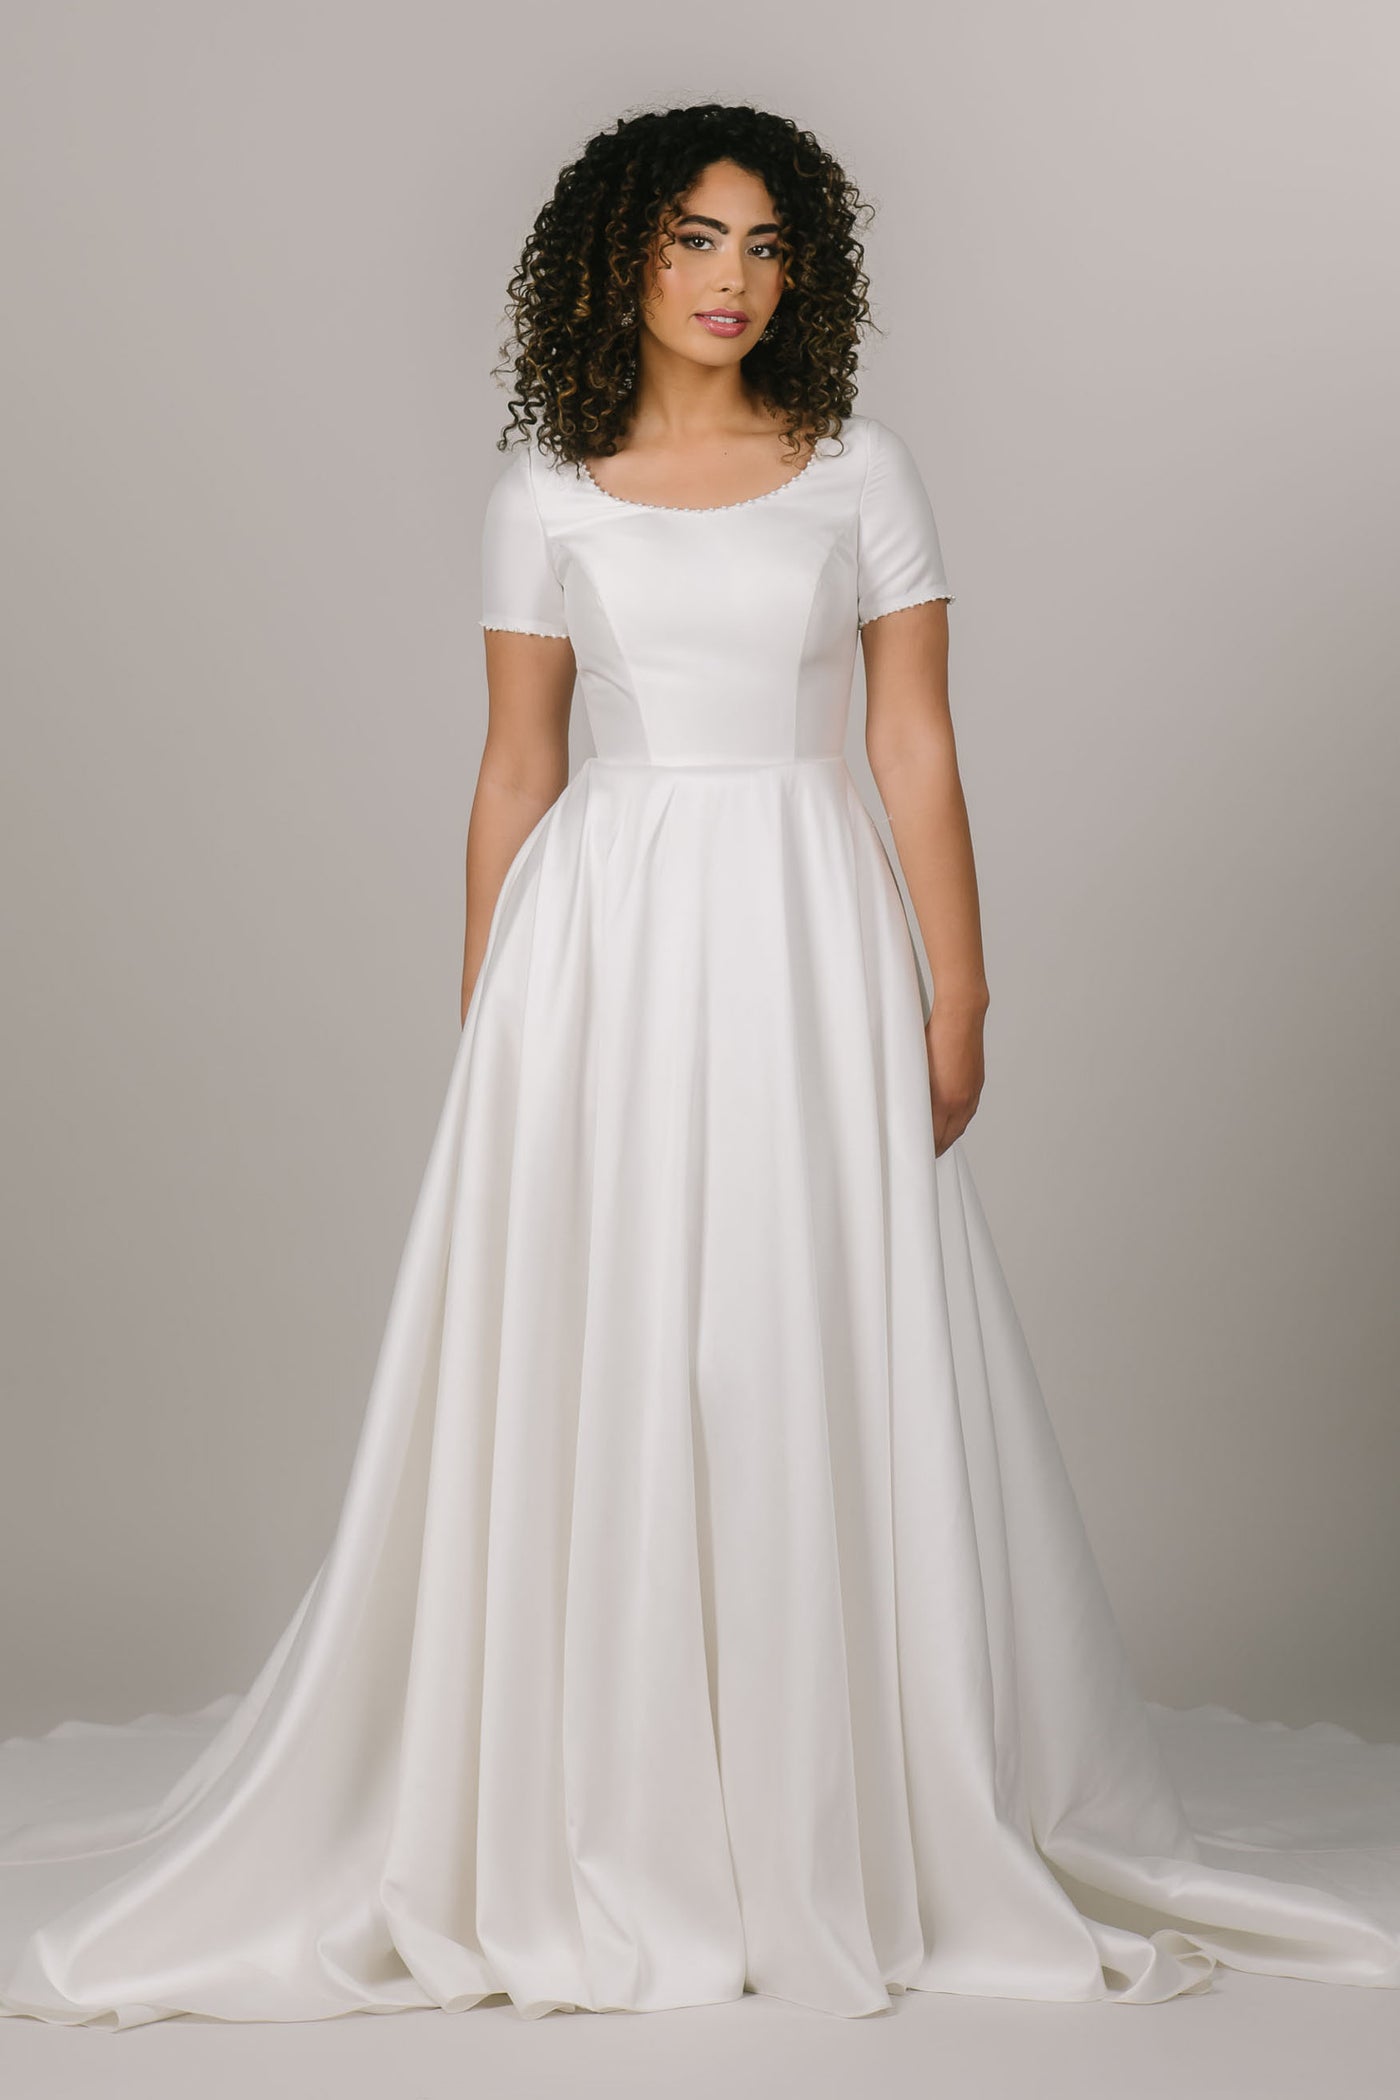 This is a front shot of a white modest wedding dress with pearl beading along the neckline and sleeves.